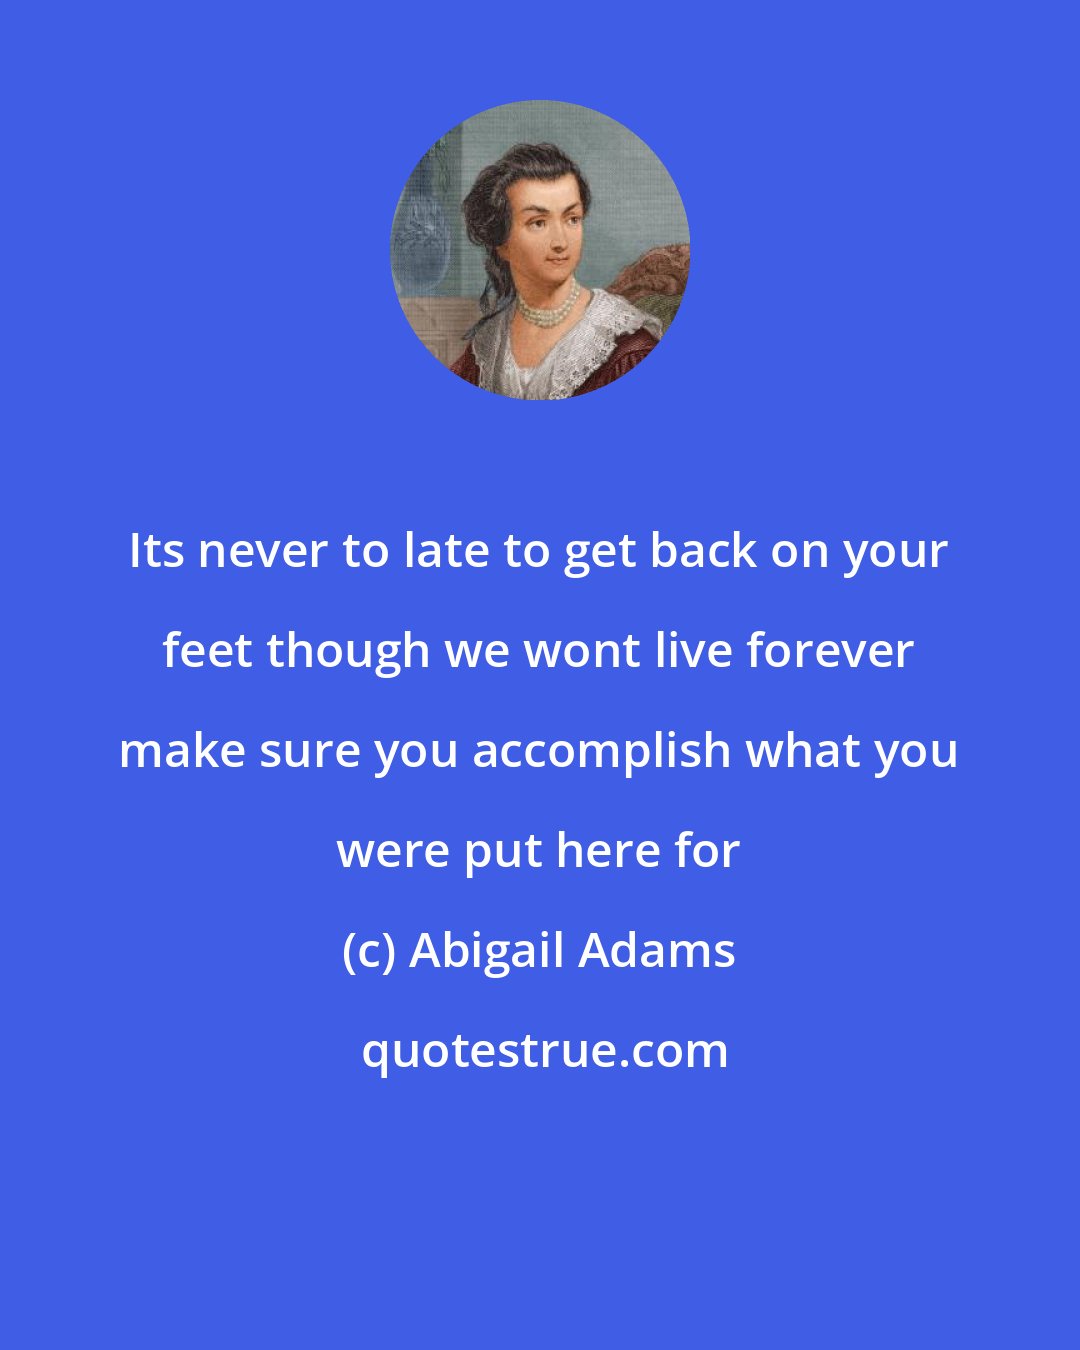 Abigail Adams: Its never to late to get back on your feet though we wont live forever make sure you accomplish what you were put here for